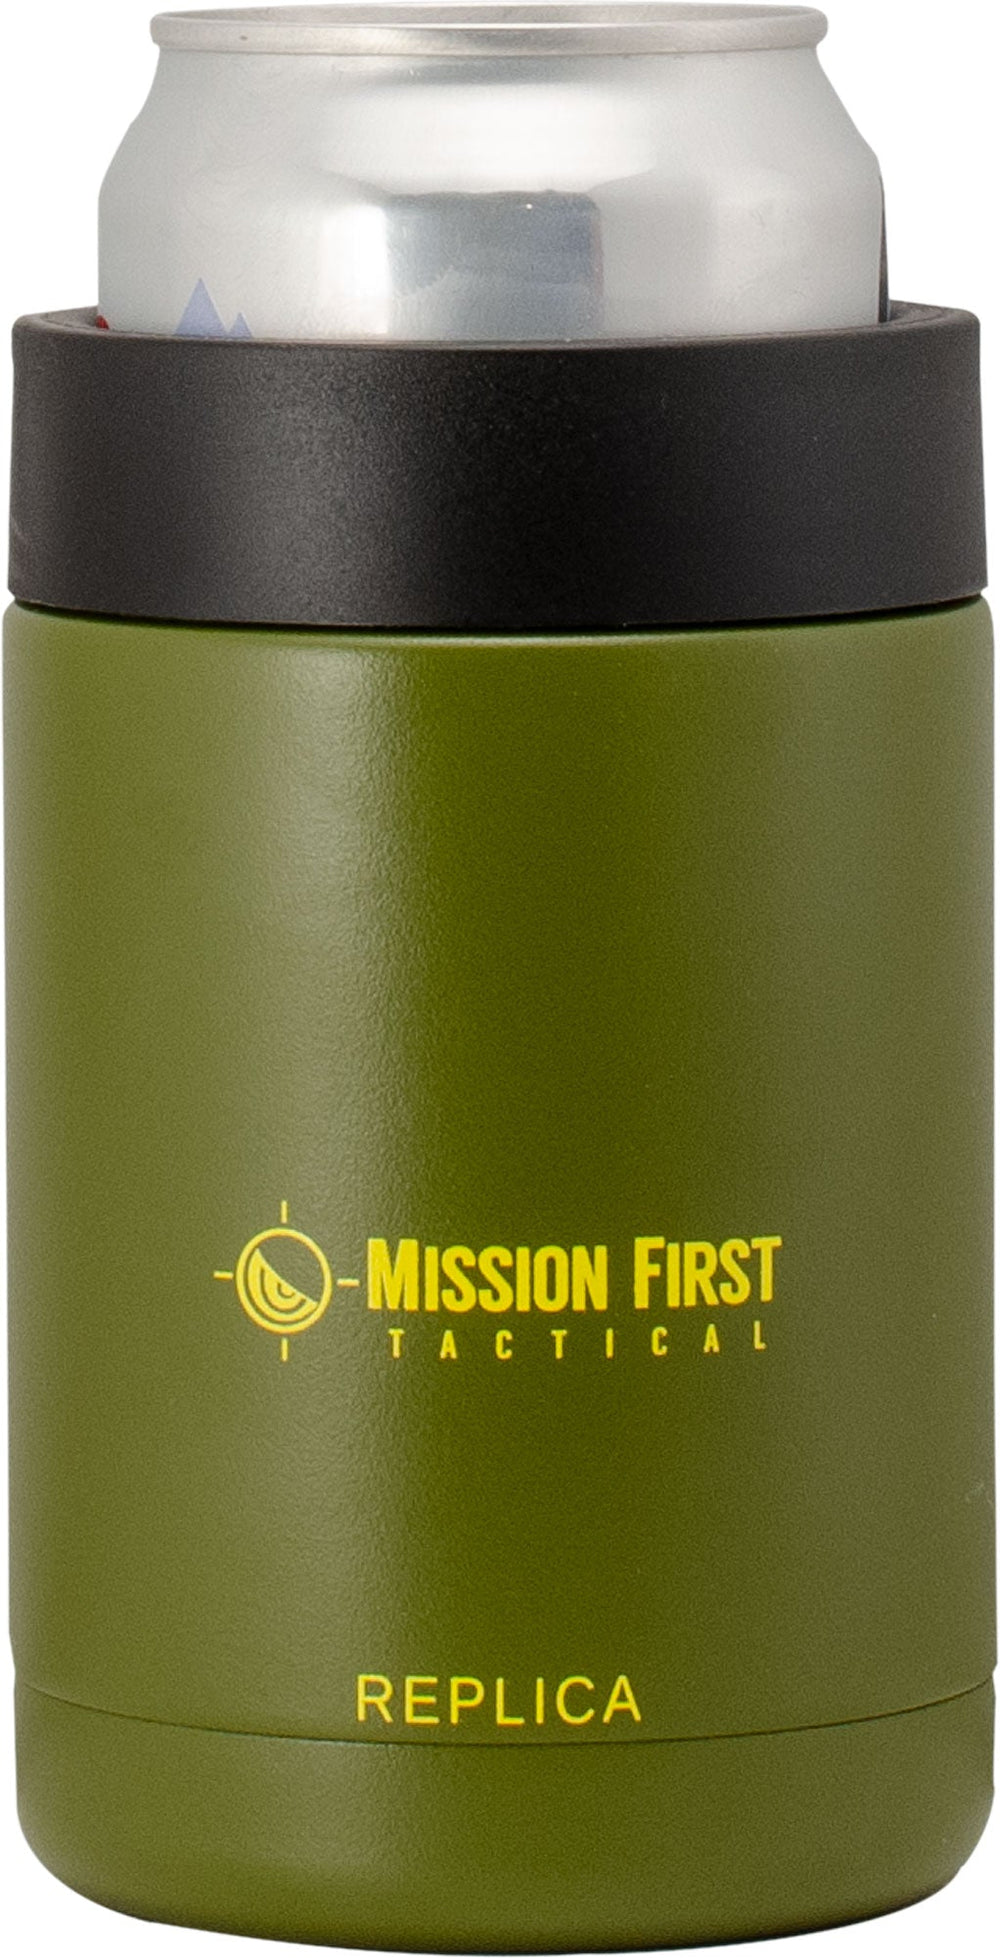 Supplies - Provisions - Drinking Tools - Mission First Tactical M107 155MM Howitzer 12-Ounce Can Cooler